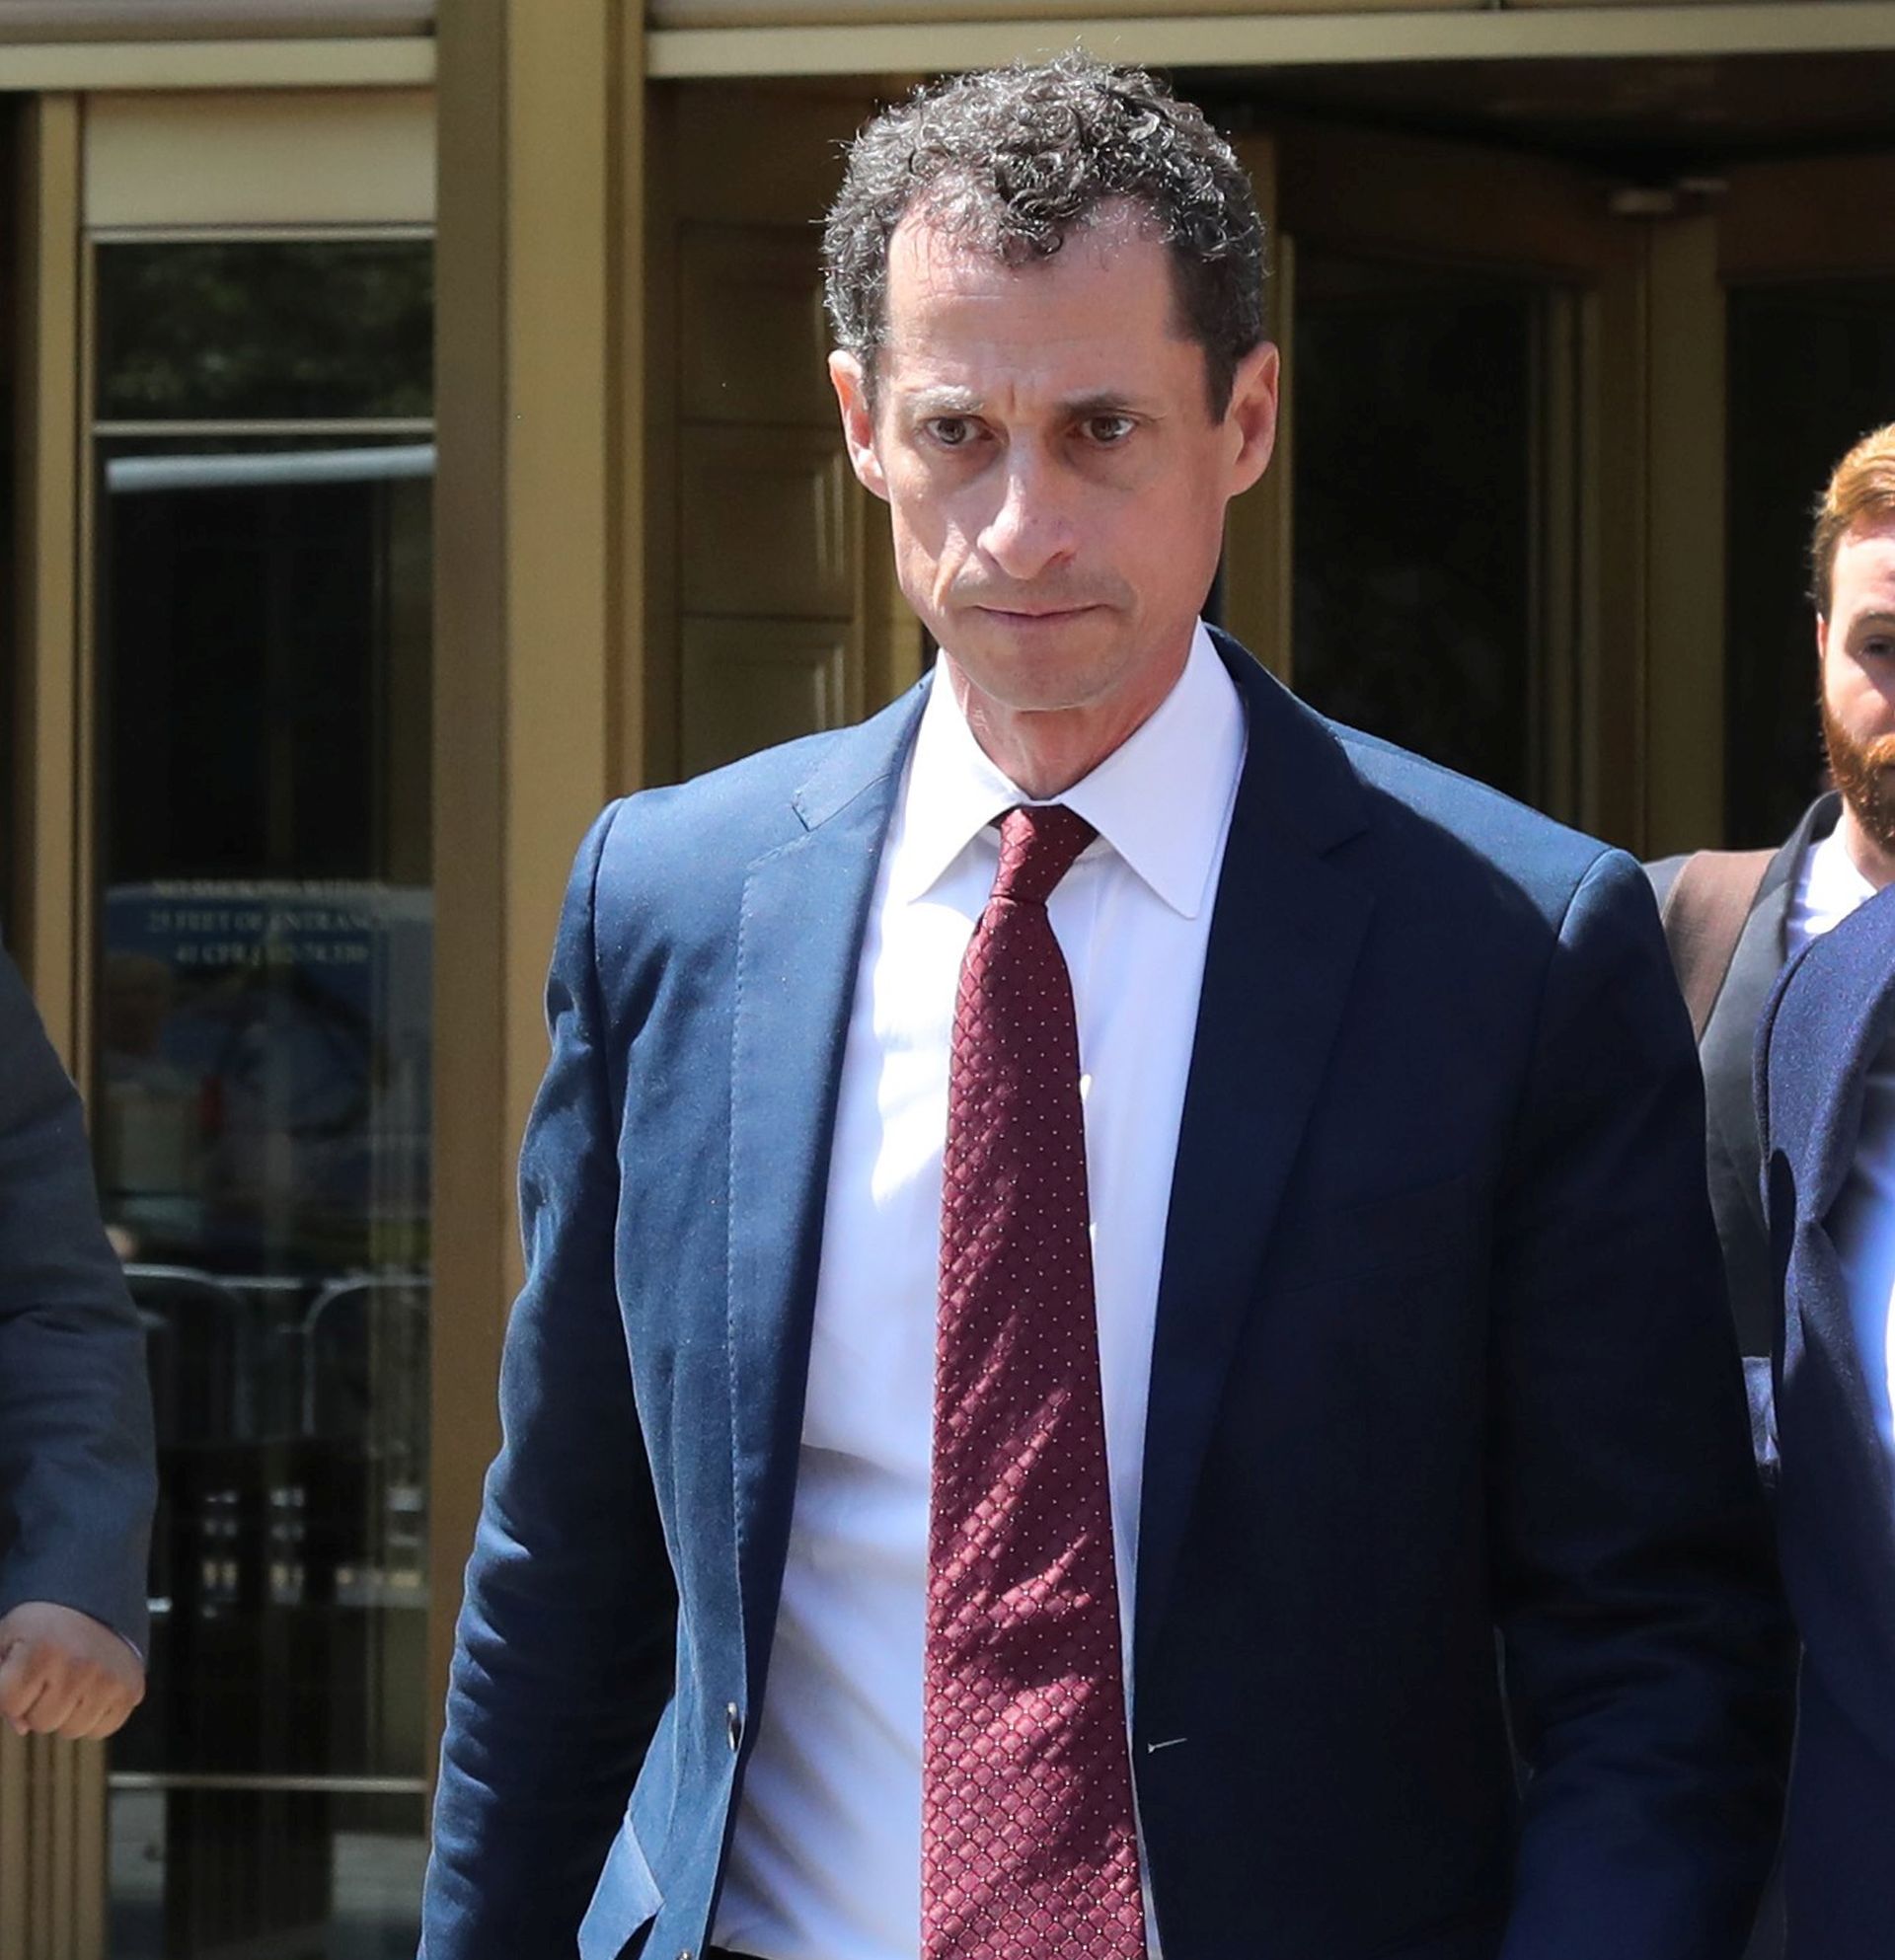 epa06226504 (FILE) - Anthony Weiner leaves Federal Court after pleading guilty to sexting with a 15-year-old girl, New York, New York, USA, 19 May 2017. Anthony Weiner has been sentenced to 21 months in prison New York City, New York, USA 25 September 2017.  EPA/ANDREW GOMBERT *** Local Caption *** 53530007